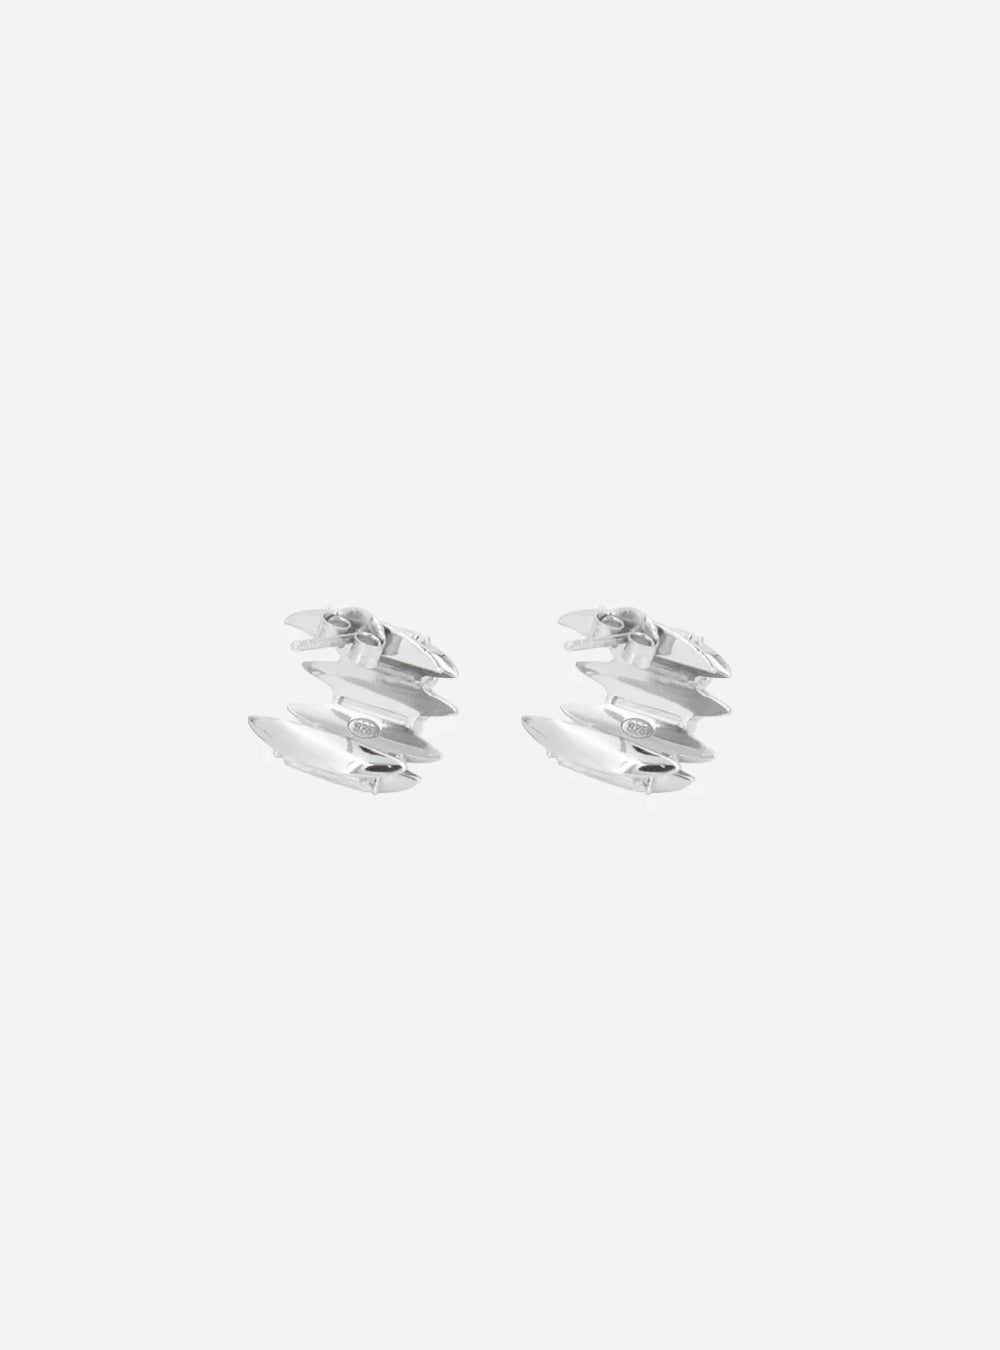 a pair of MIDNIGHTFACTORY Talon eternity earrings on a white surface.